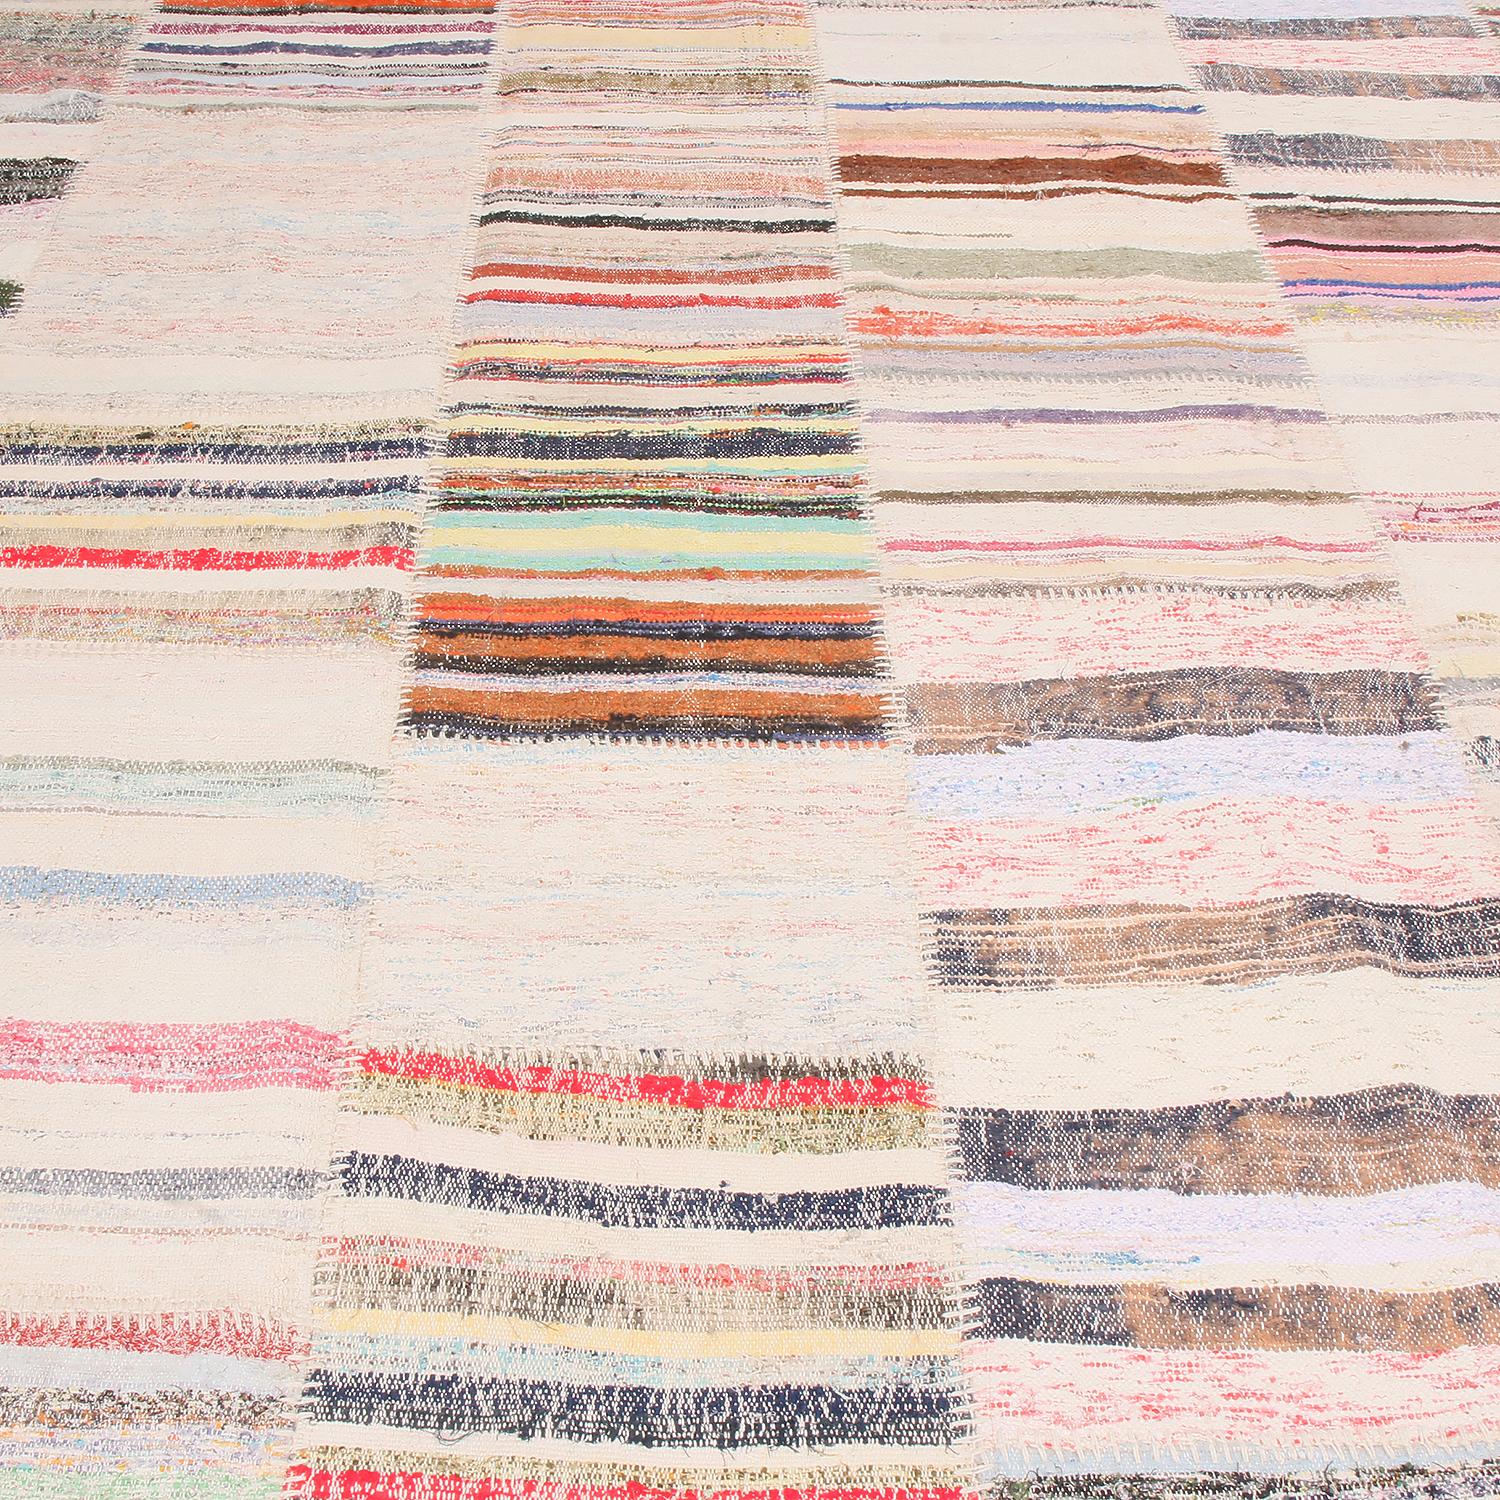 Handwoven in high-quality wool originating from Turkey, this new flat-woven geometric Kilim rug from Rug & Kilim’s patchwork collection is comprised of select pieces from vintage Kilim rugs with a brilliant spectrum of red, blue, pink, green, and